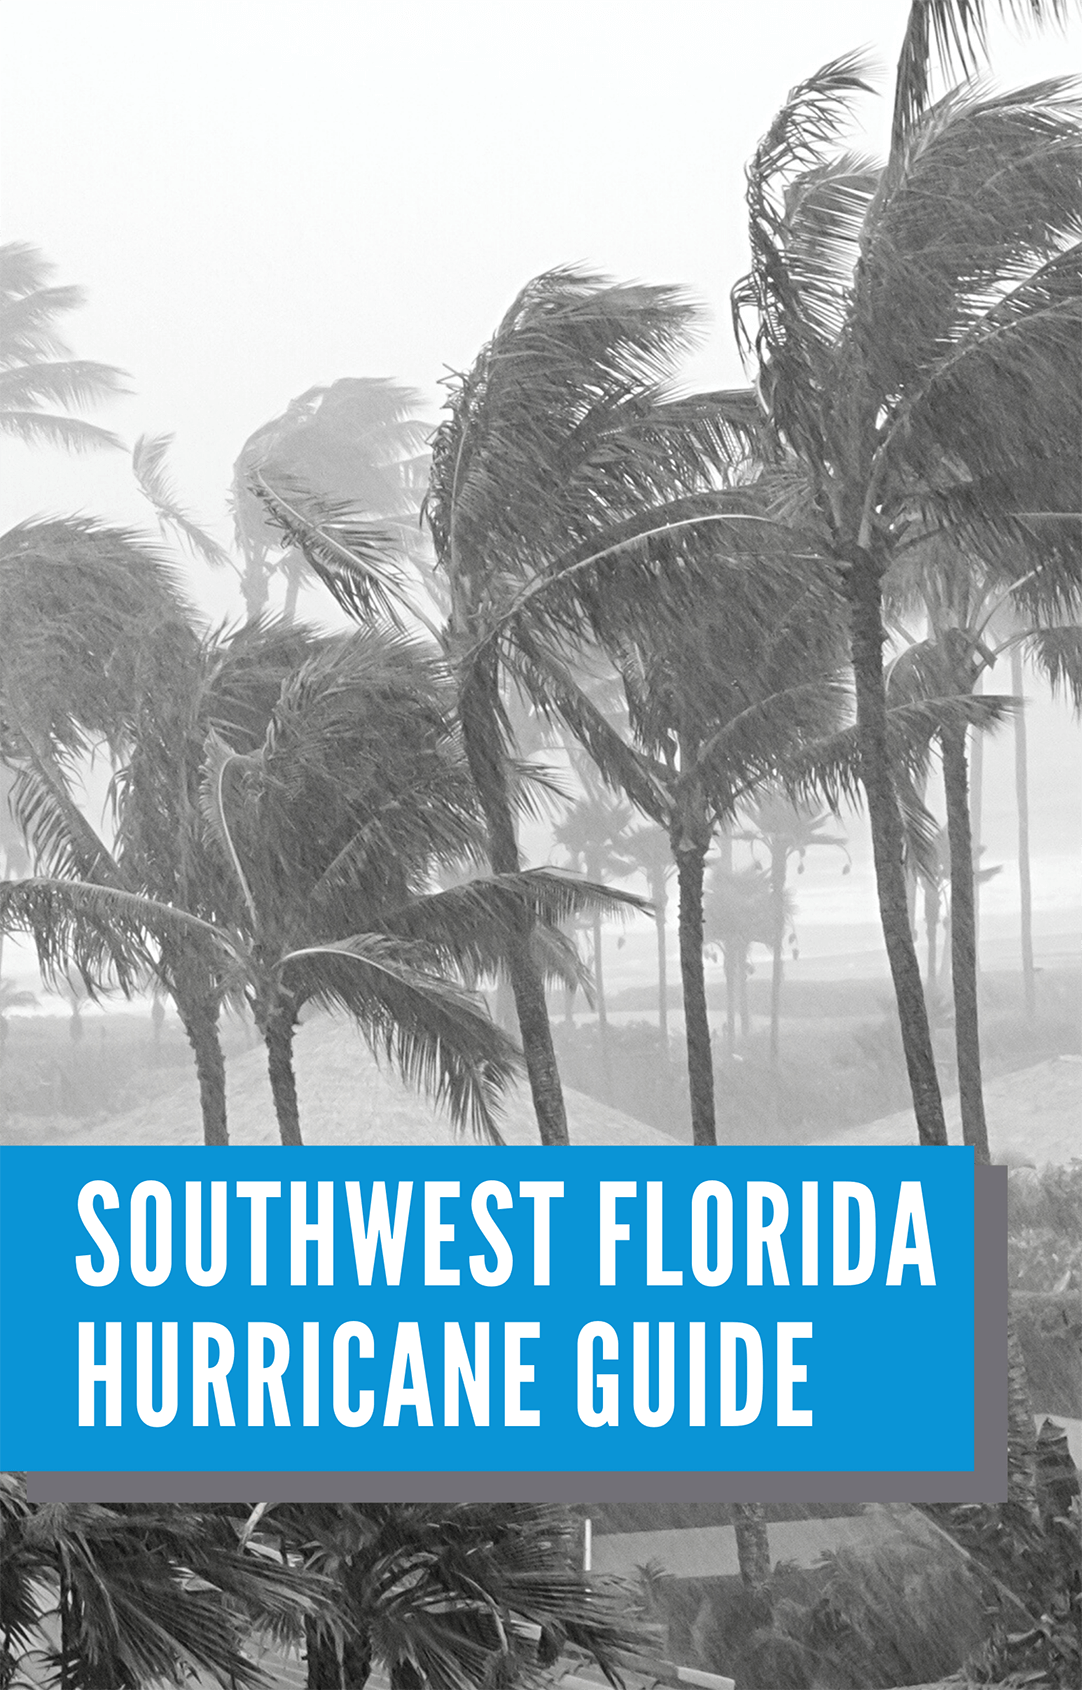 Naples Hurricane Guide by Sonja Pound